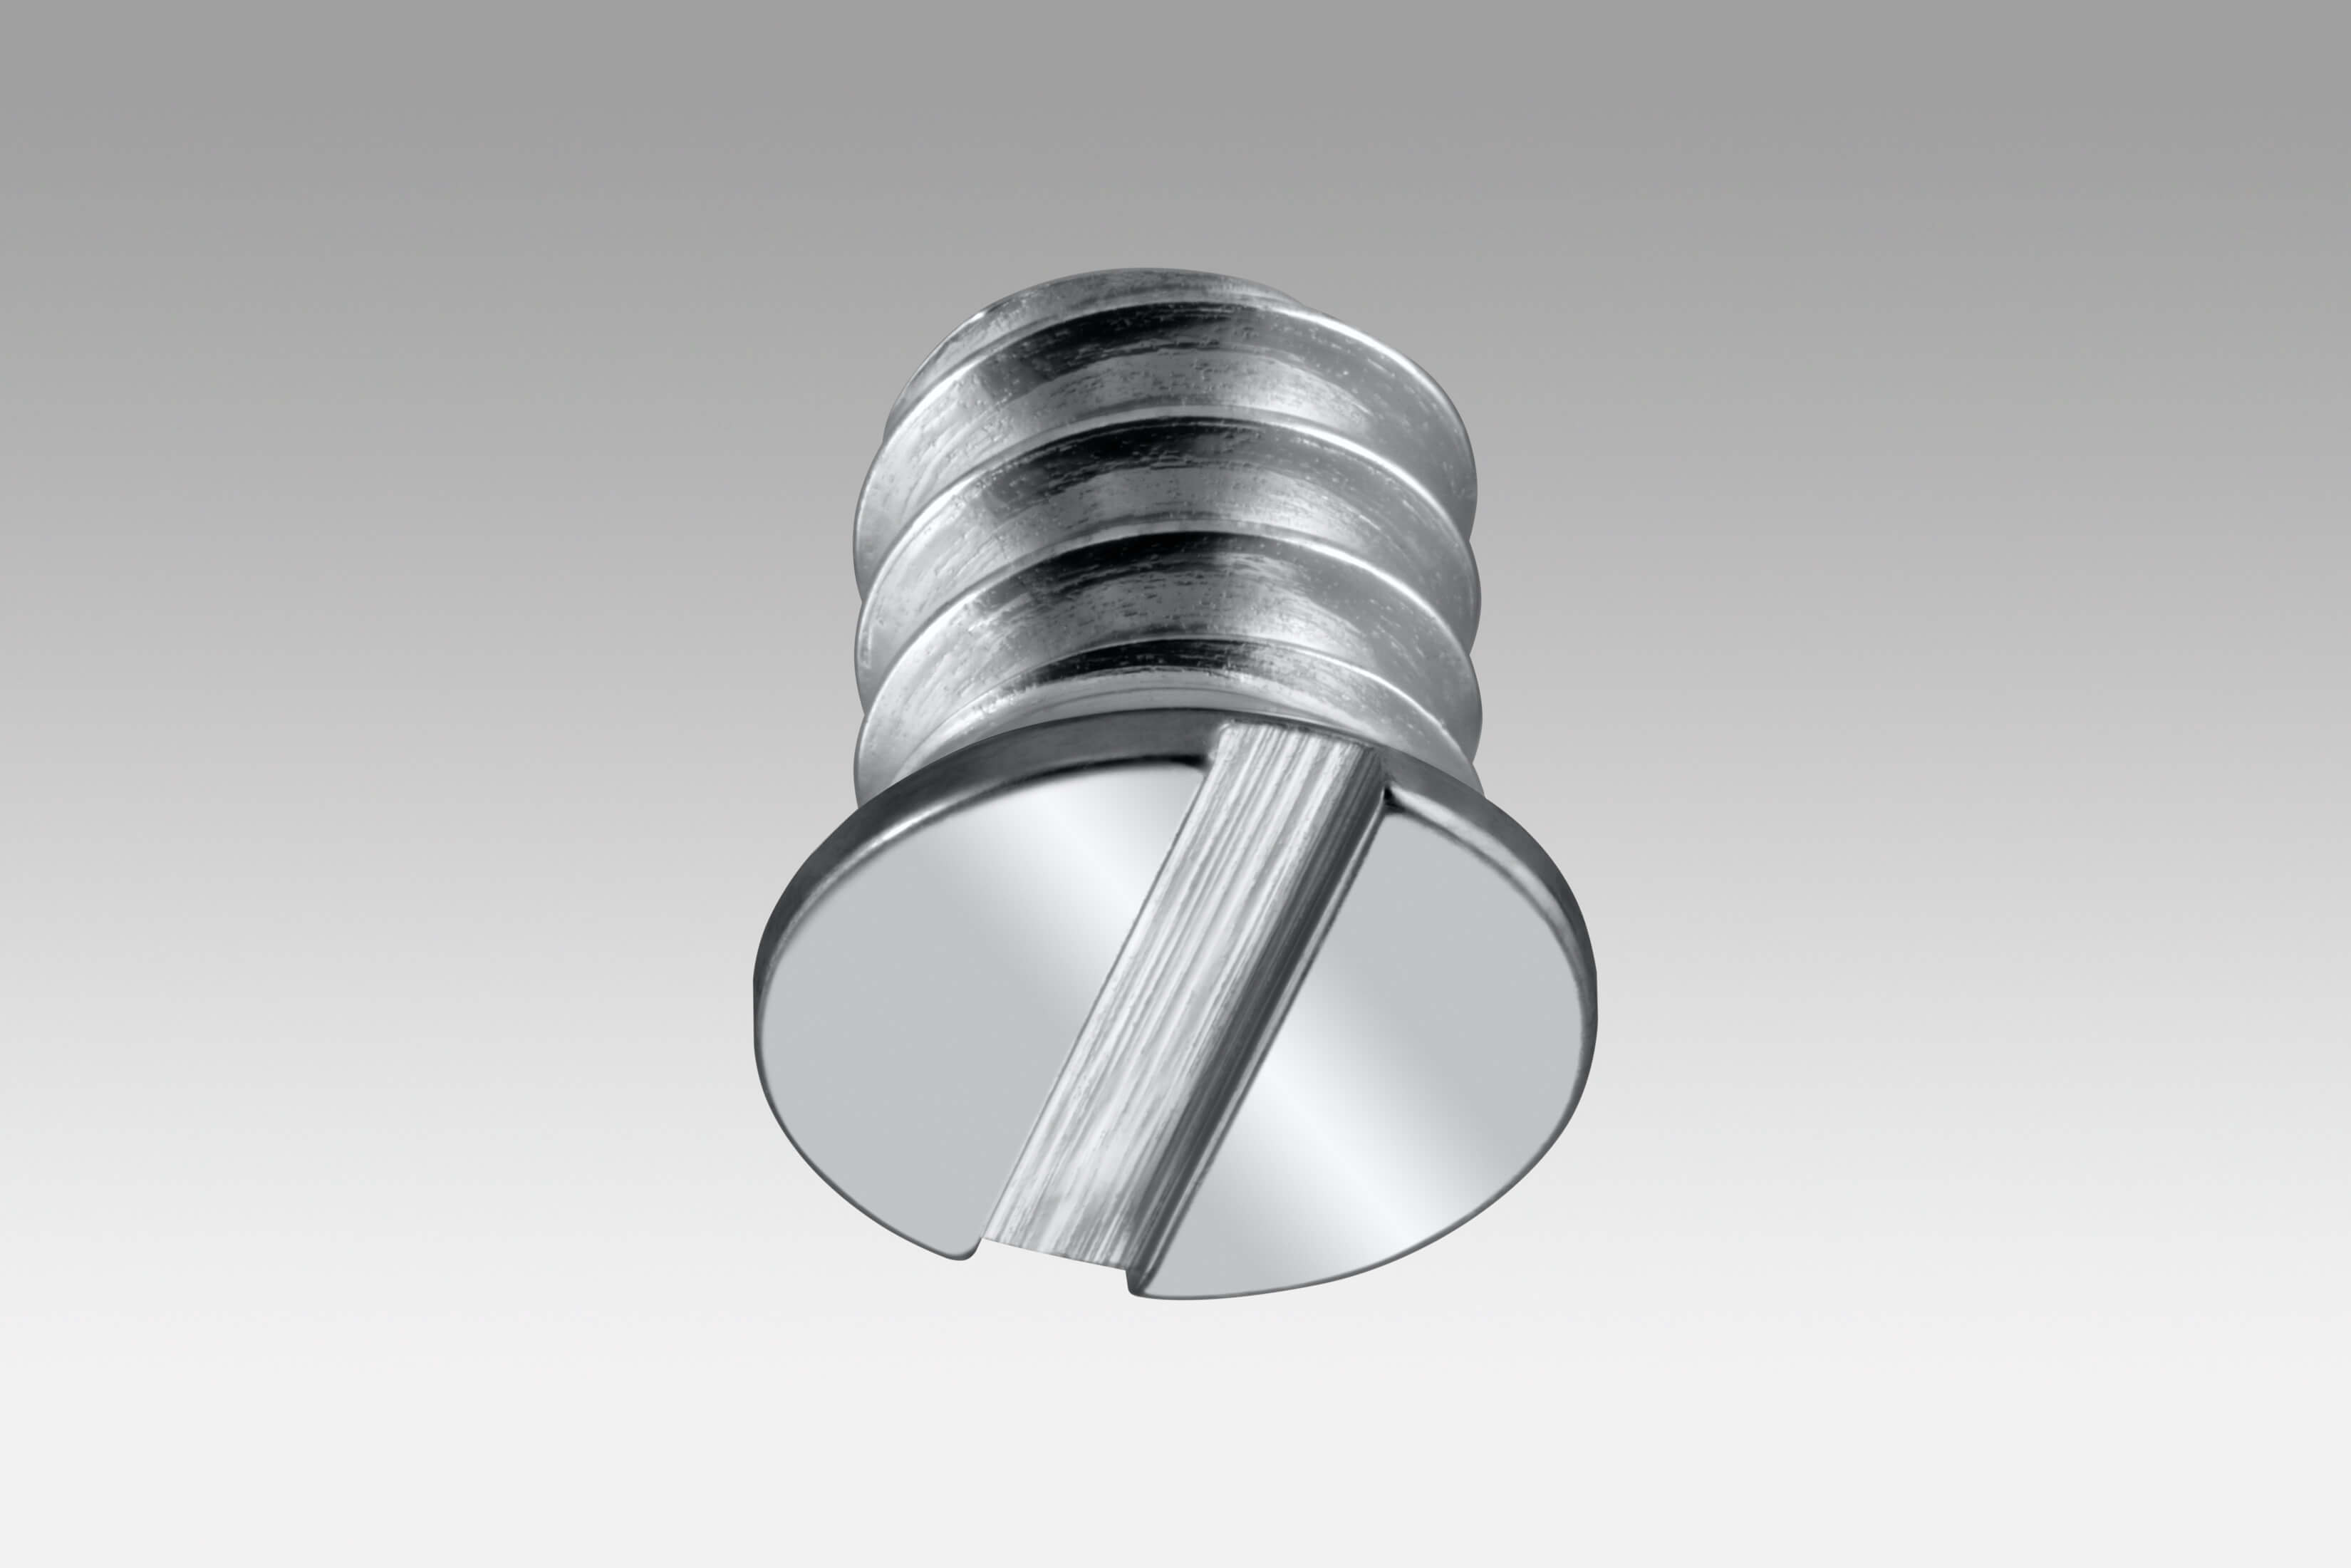 : Screw (conical head, domed) - Swiss supplier and manufacturer of micro-parts for watchmaking